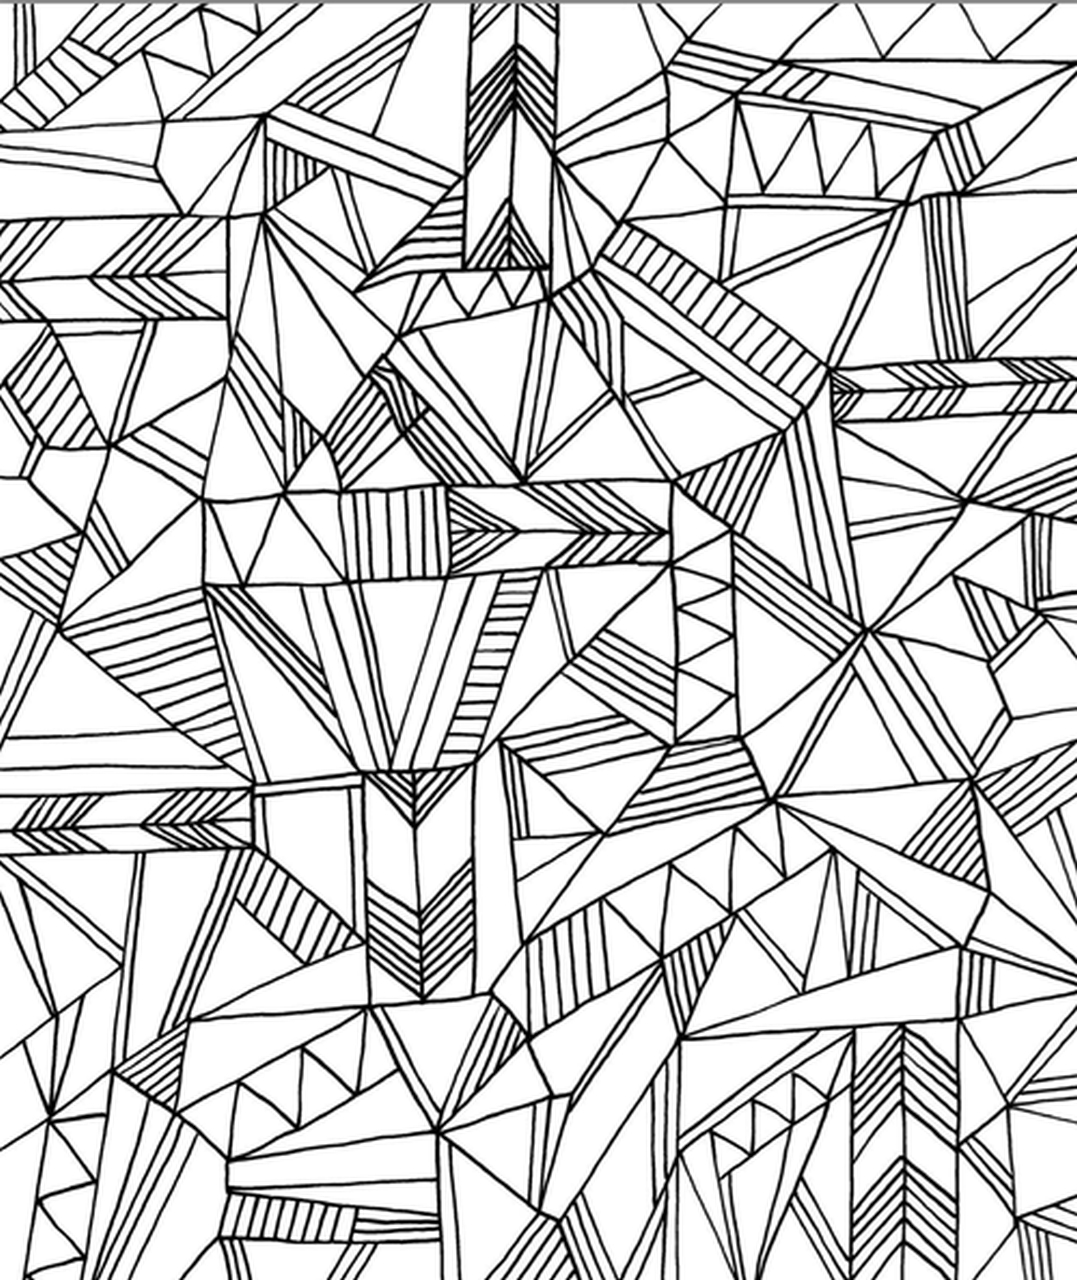 Get This Printable Geometric Coloring Pages for Adults - 67381